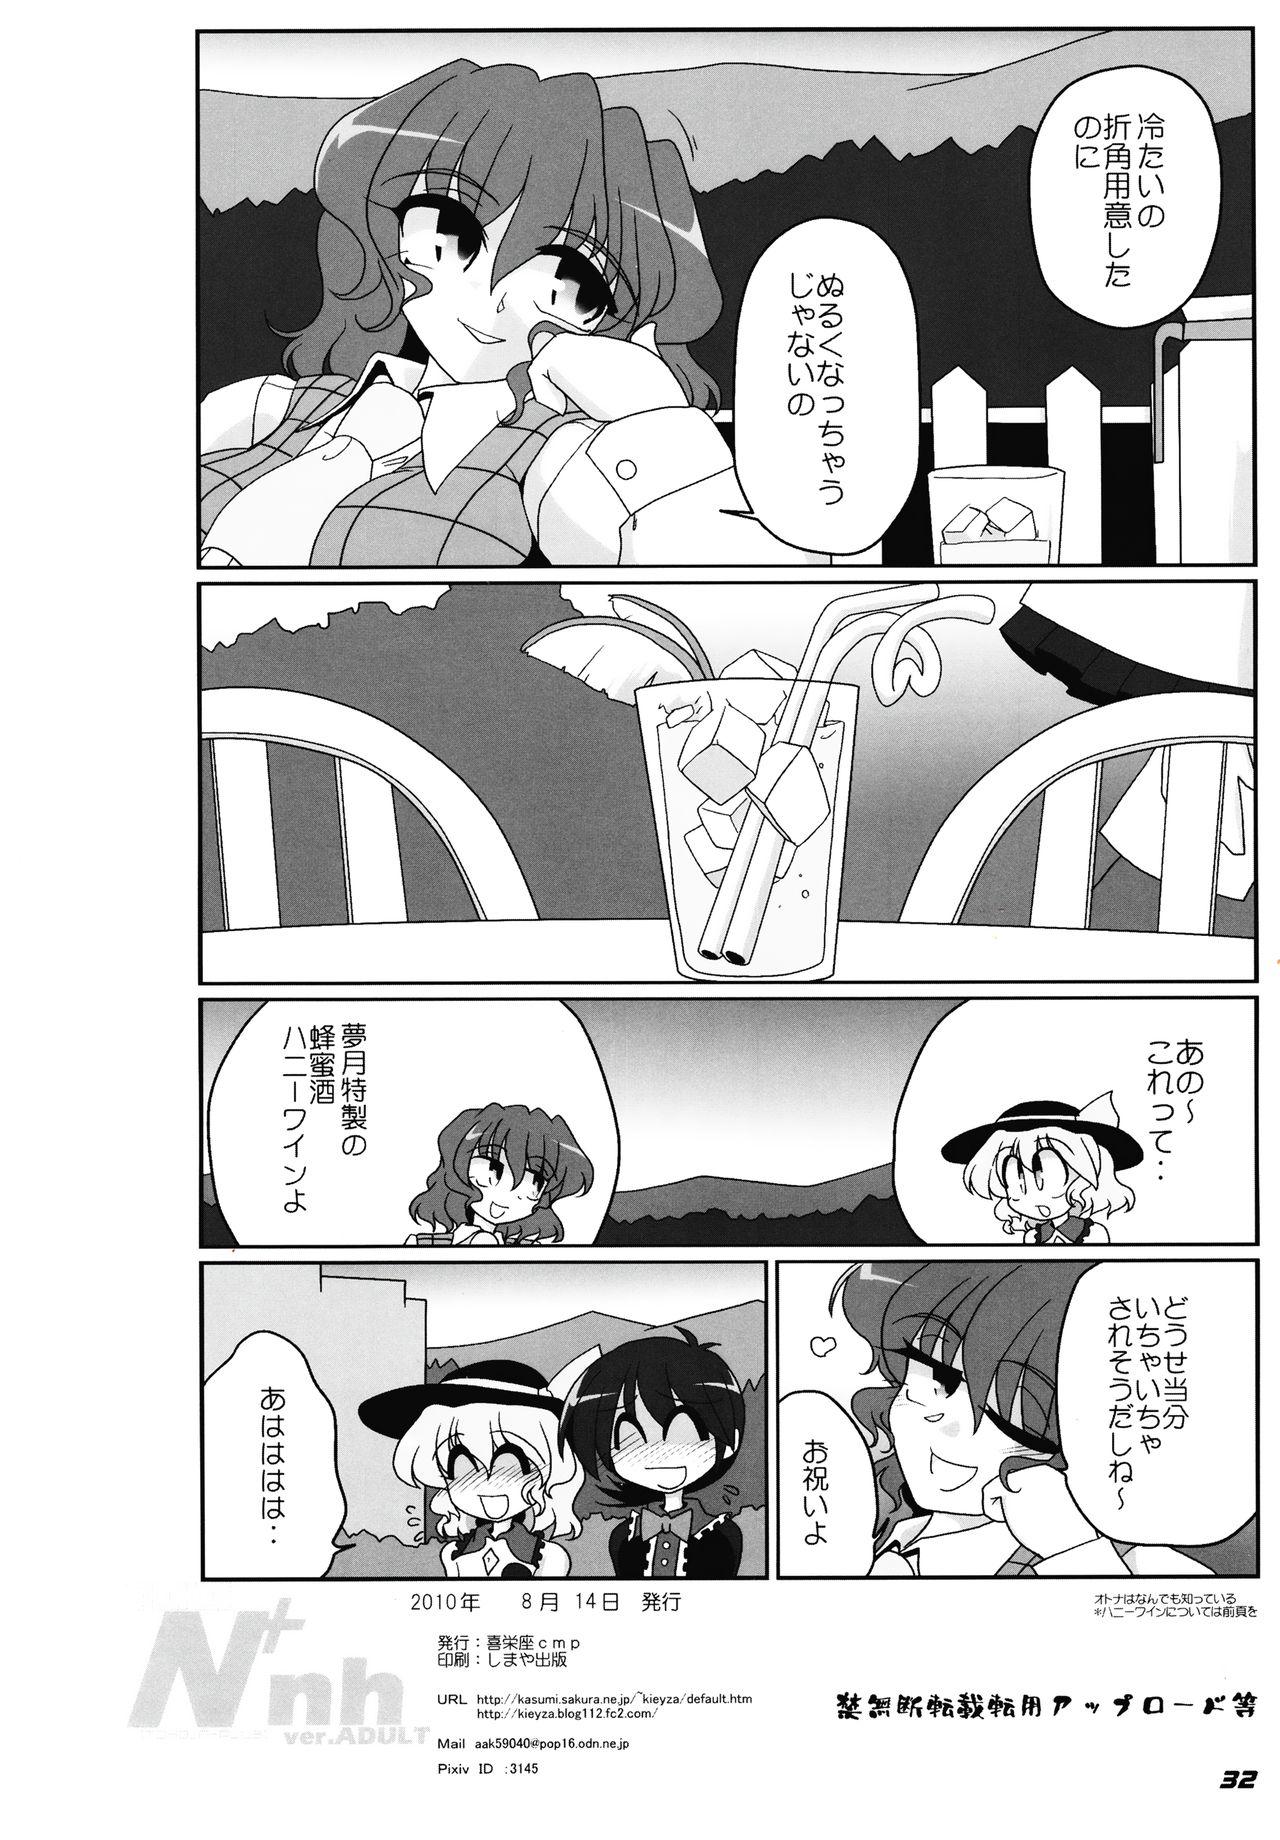 Perrito TOHO N+ nh ver.ADULT - Touhou project Teenage Porn - Page 33